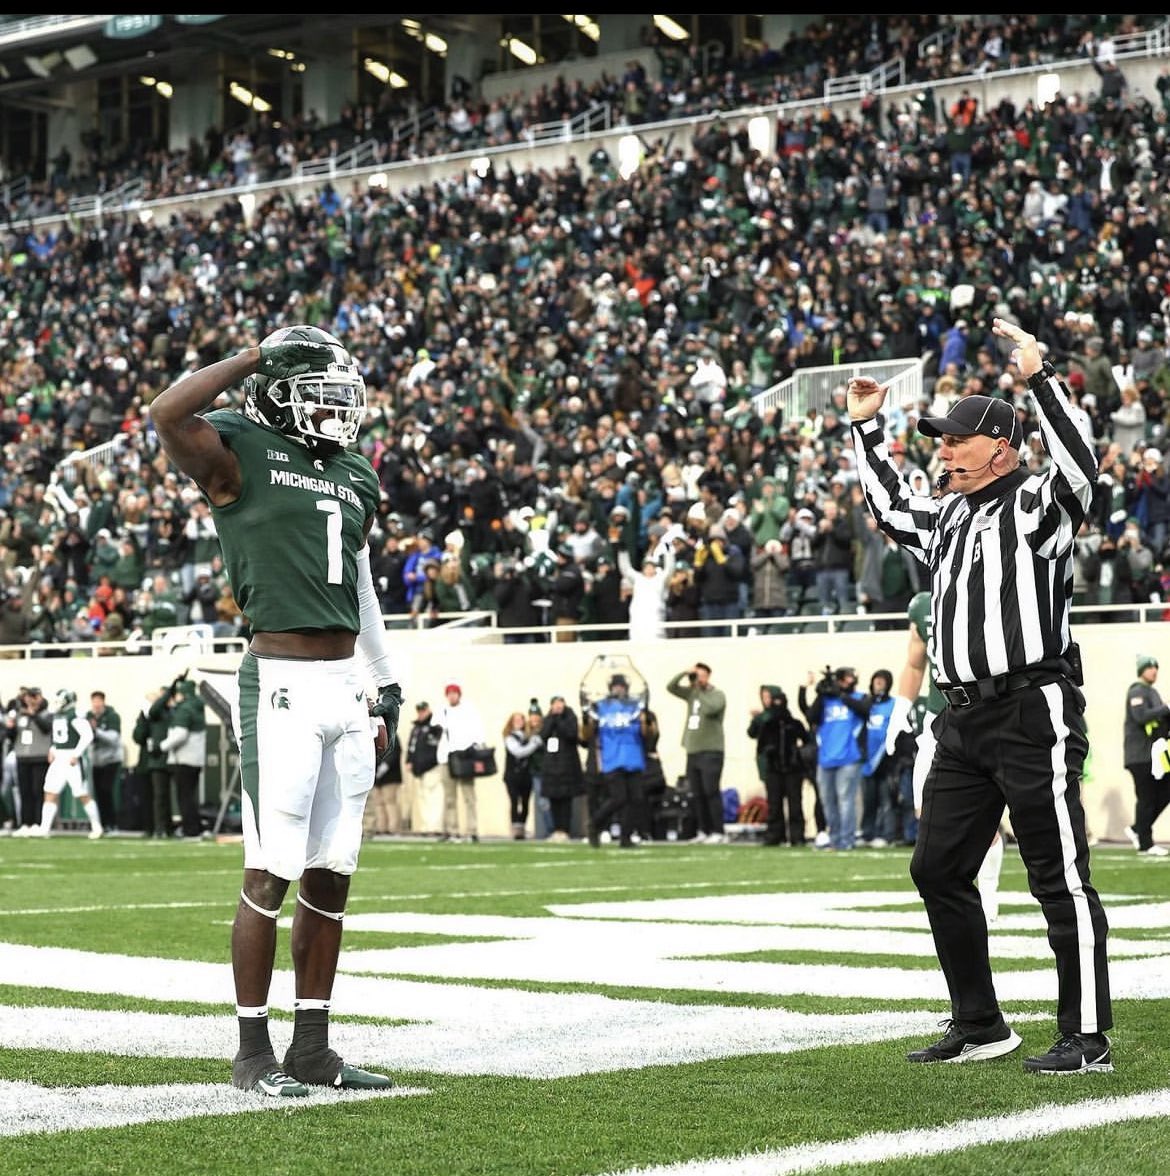 Blessed to receive an offer from Michigan State 🟢⚪️ #SBG @CoachJustinAR @CoachCammm @CoachMessay